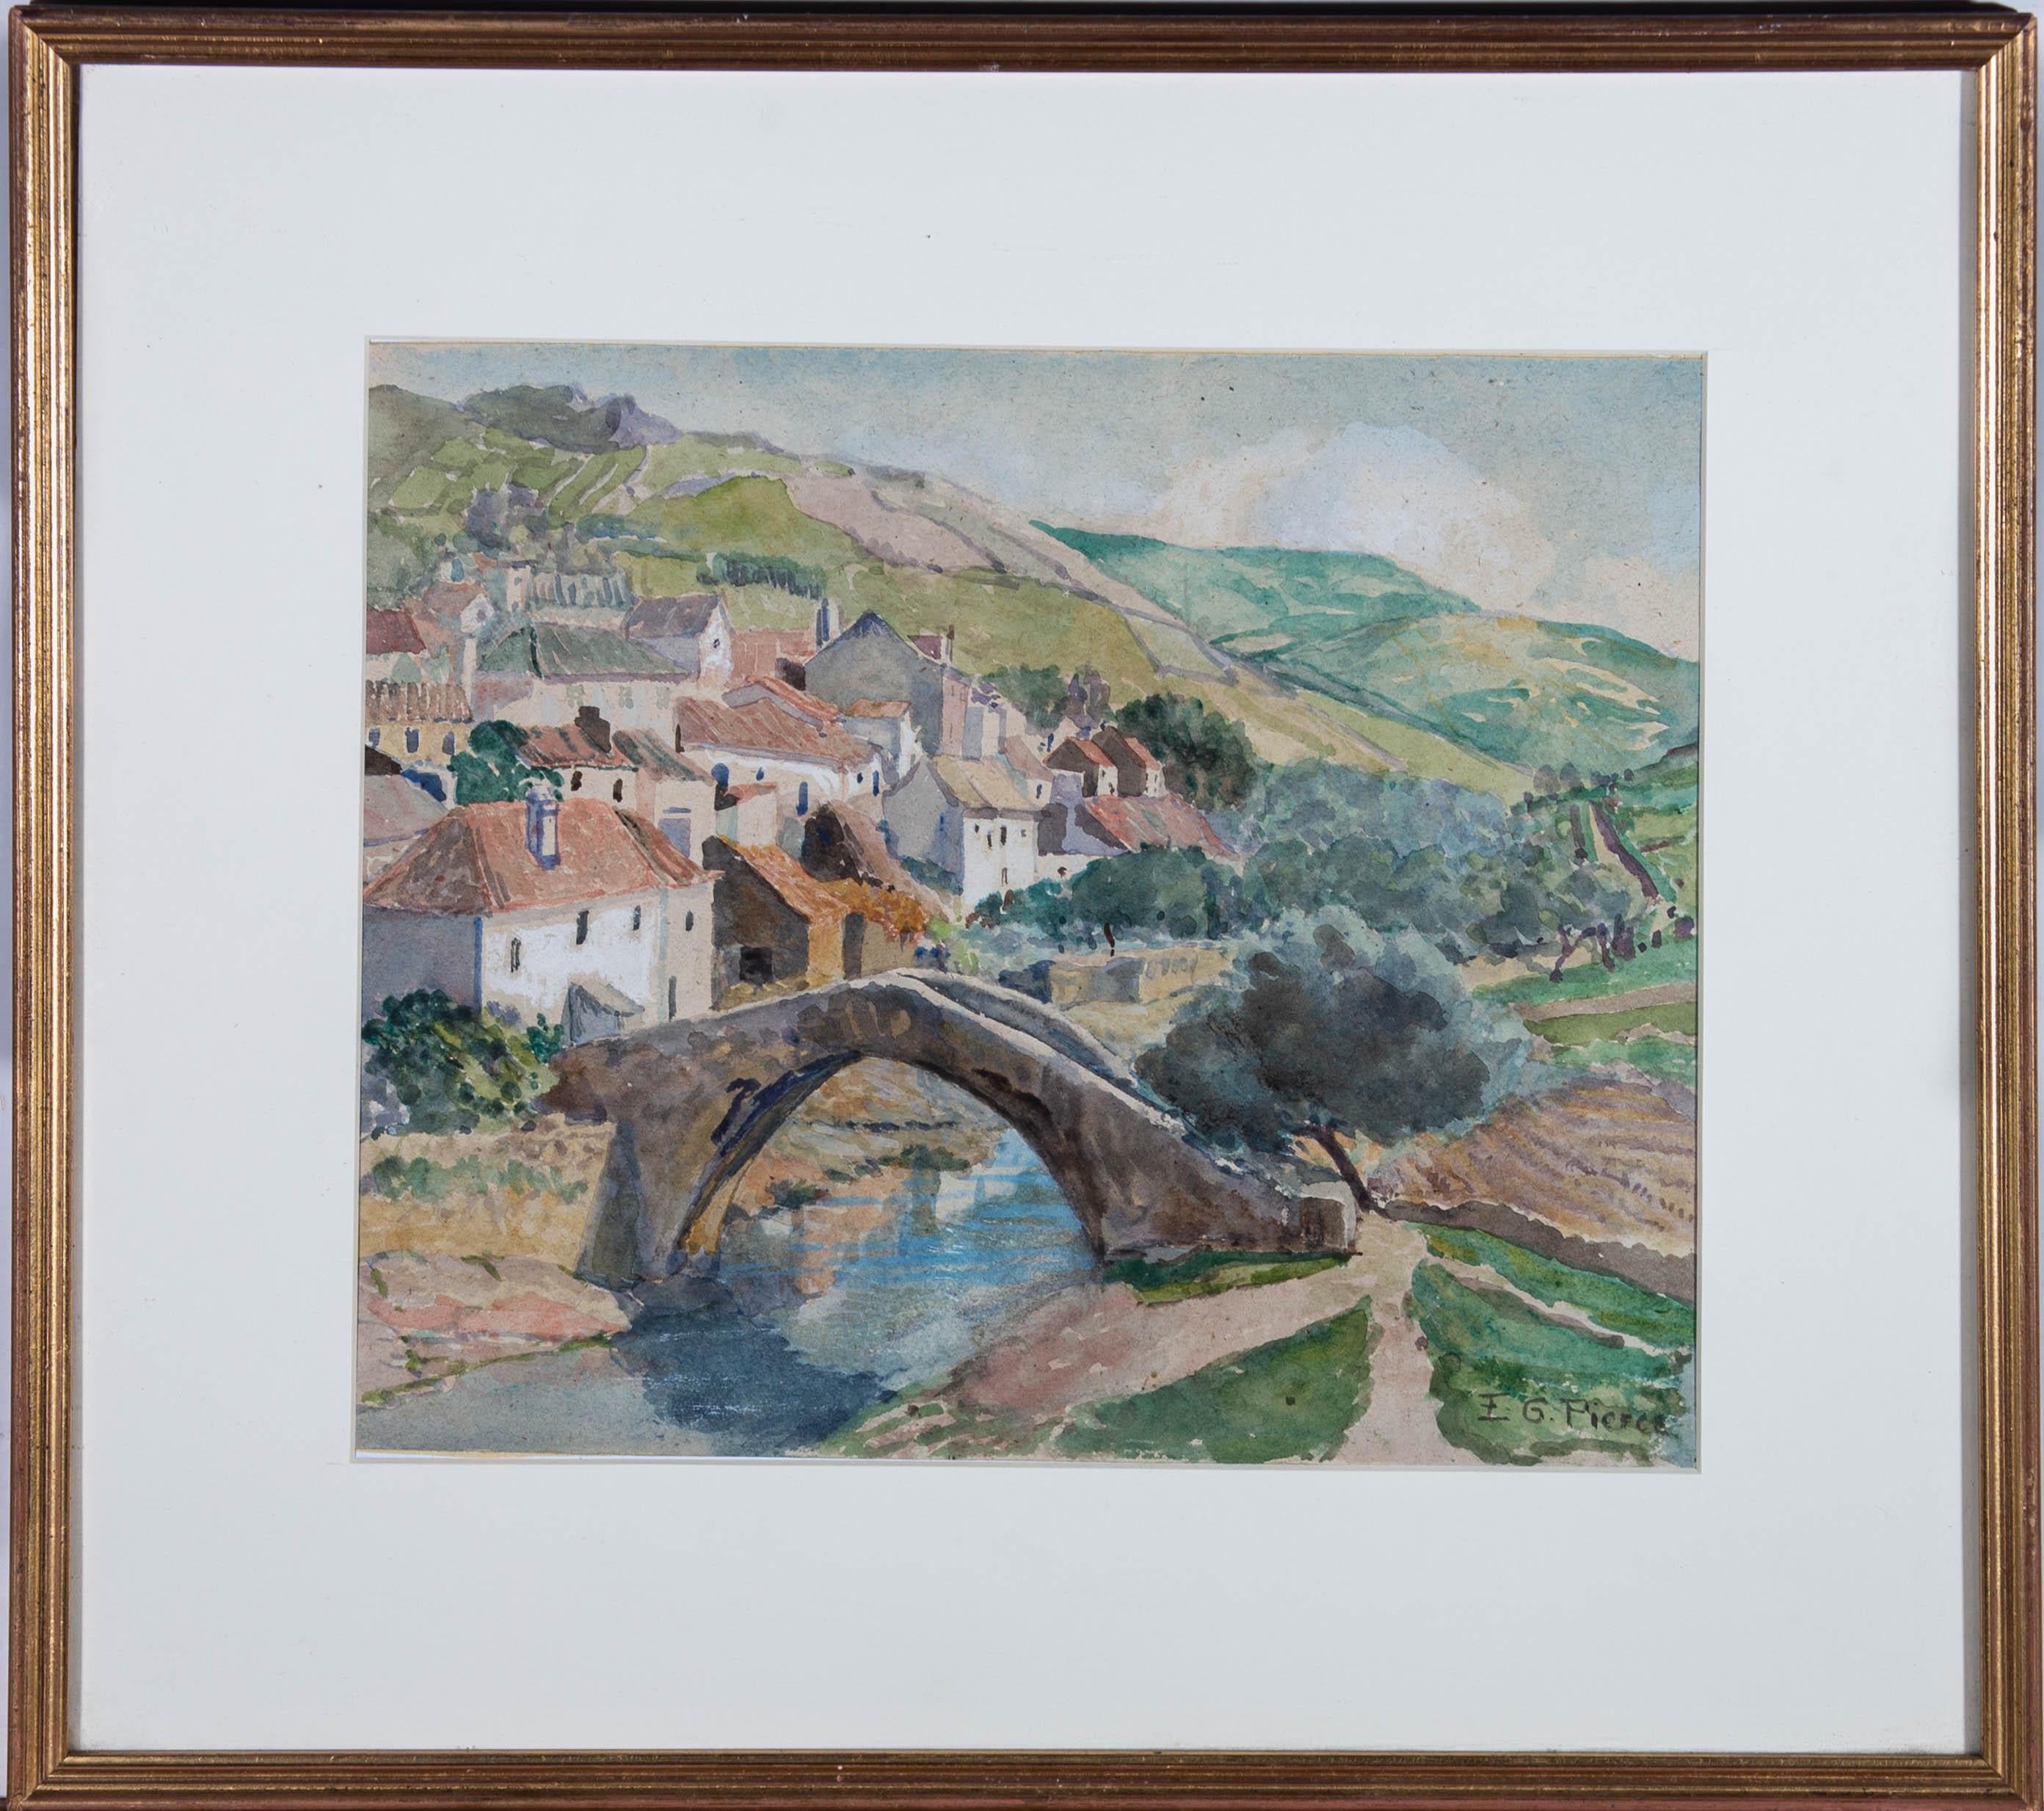 A wonderful study of an Italian or French village beside a river. Lush green hills surround the houses and a large stone bridge crosses the water. Very well presented in a cream card mount and gilt effect frame. Signed to the lower right. On